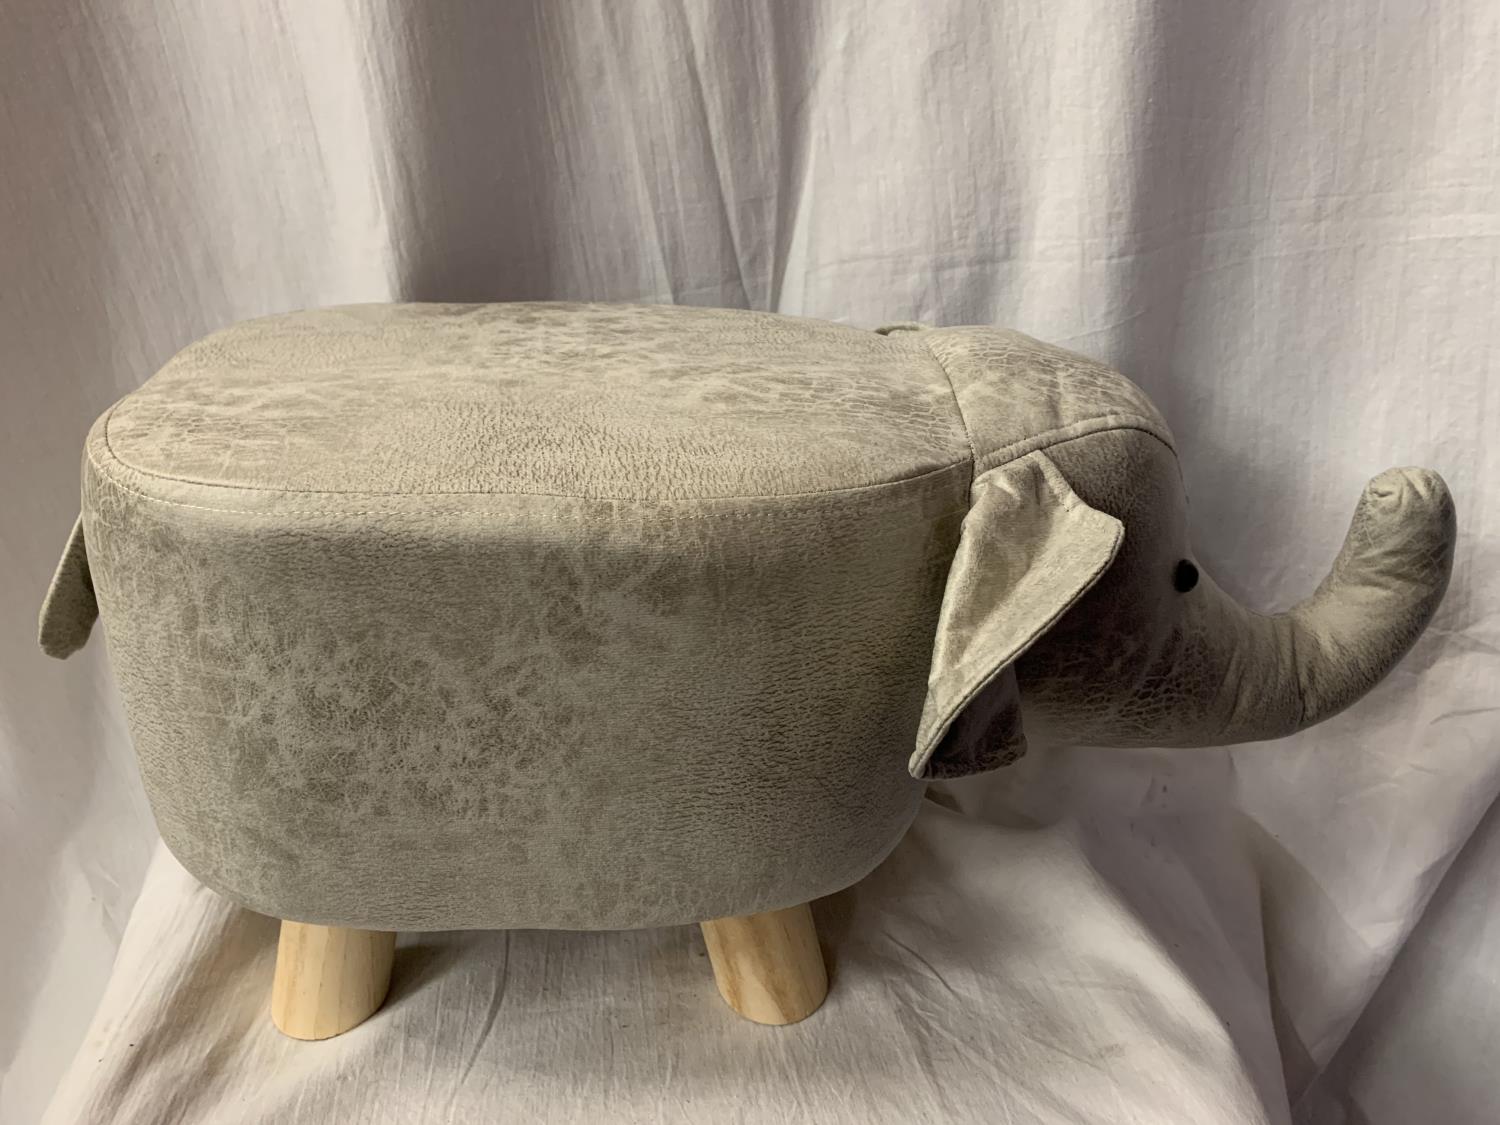 A FAUX LEATHER CHILD'S FOOT STOOL IN THE FORM OF AN ELEPHANT - Image 4 of 5